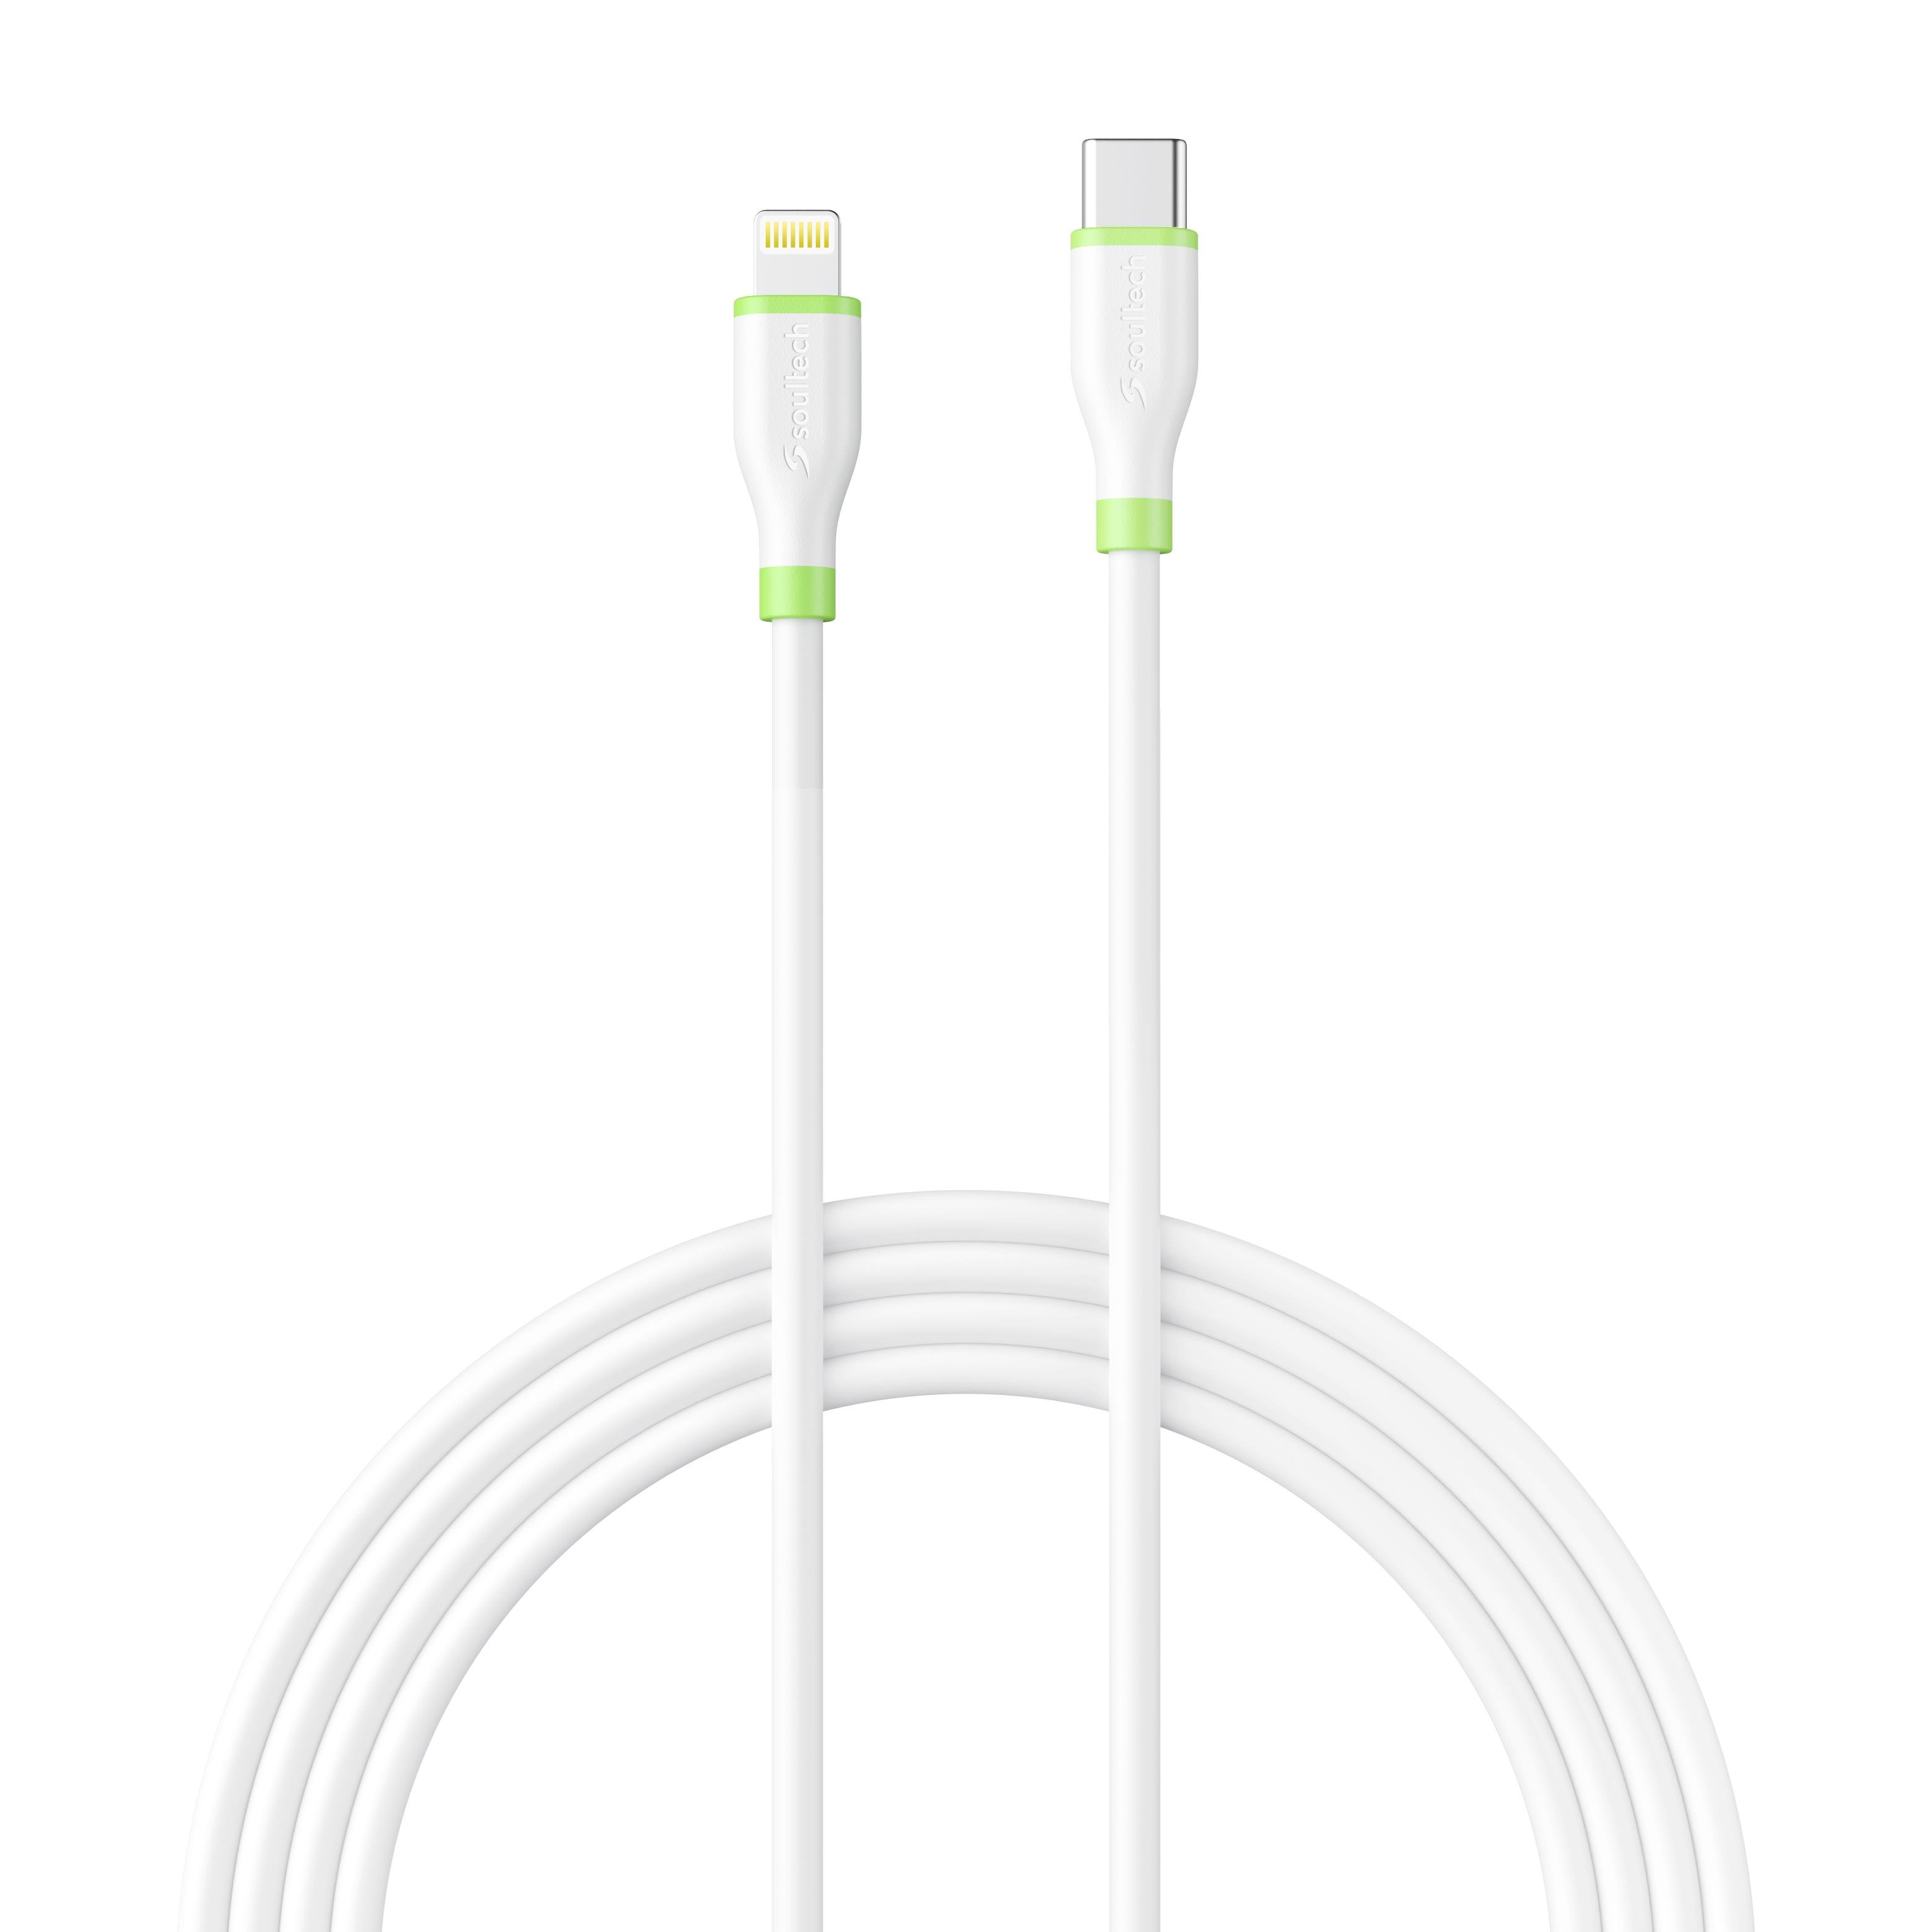 Soultech DK070B iPhone to Type-C 3A Soft Cable